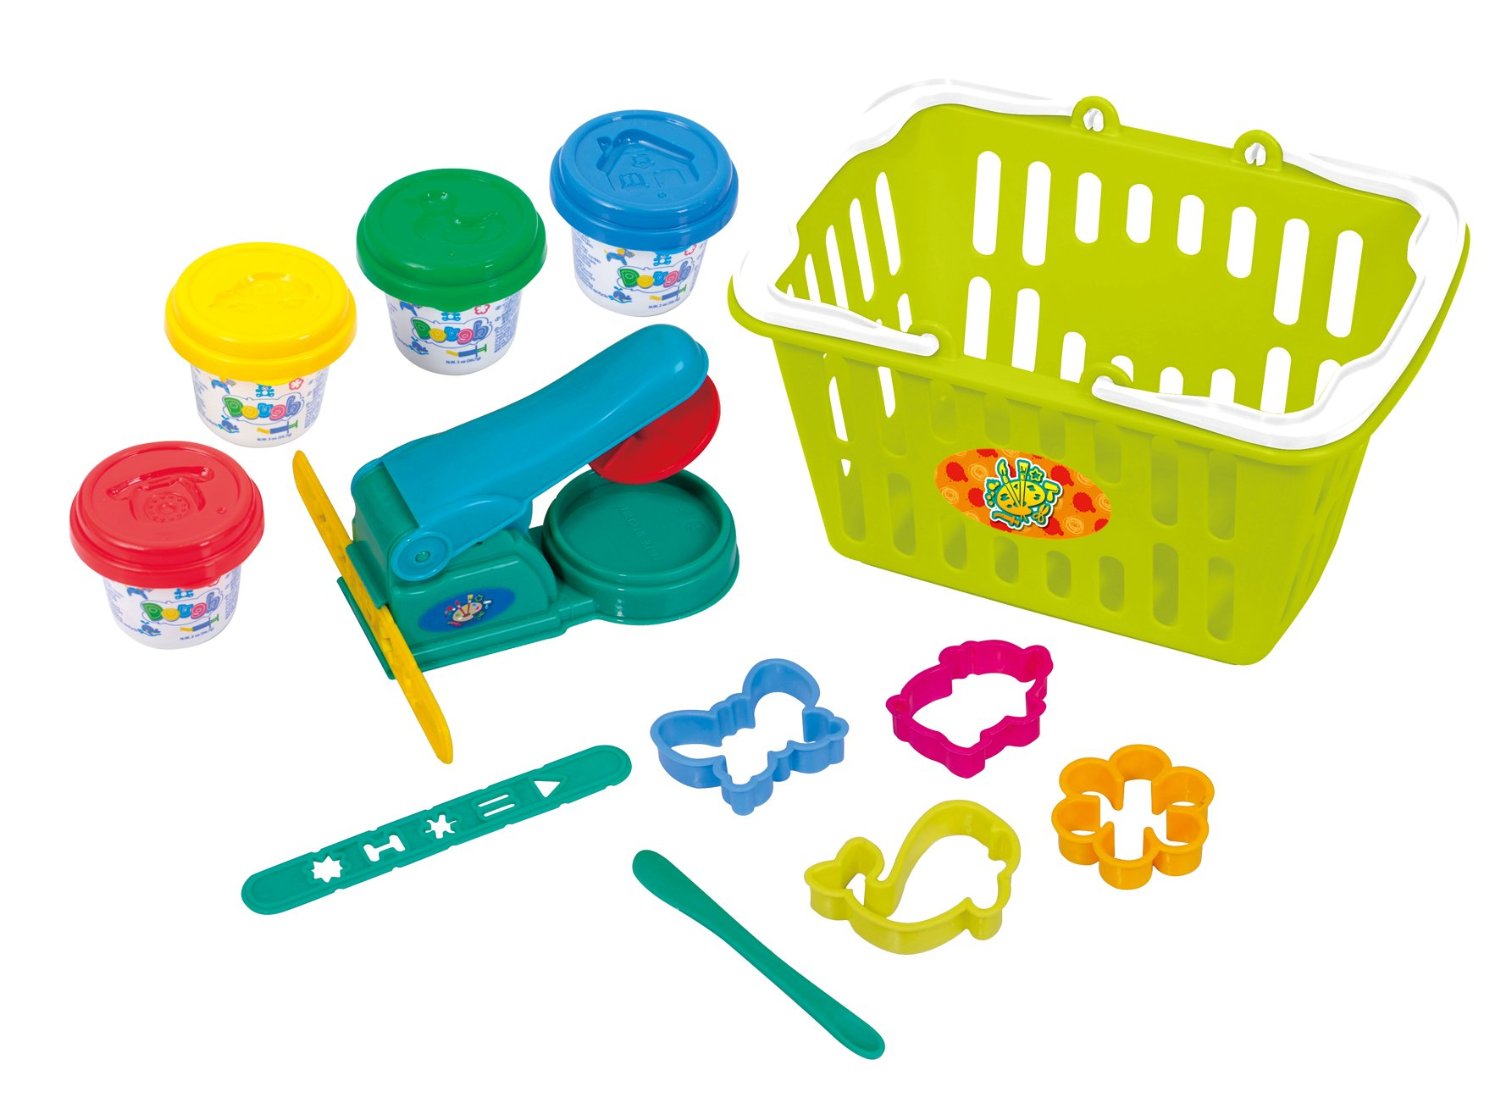 PlayGo Dough Playset in Basket Dough Only $5.56 on Amazon! (Add-On Item)